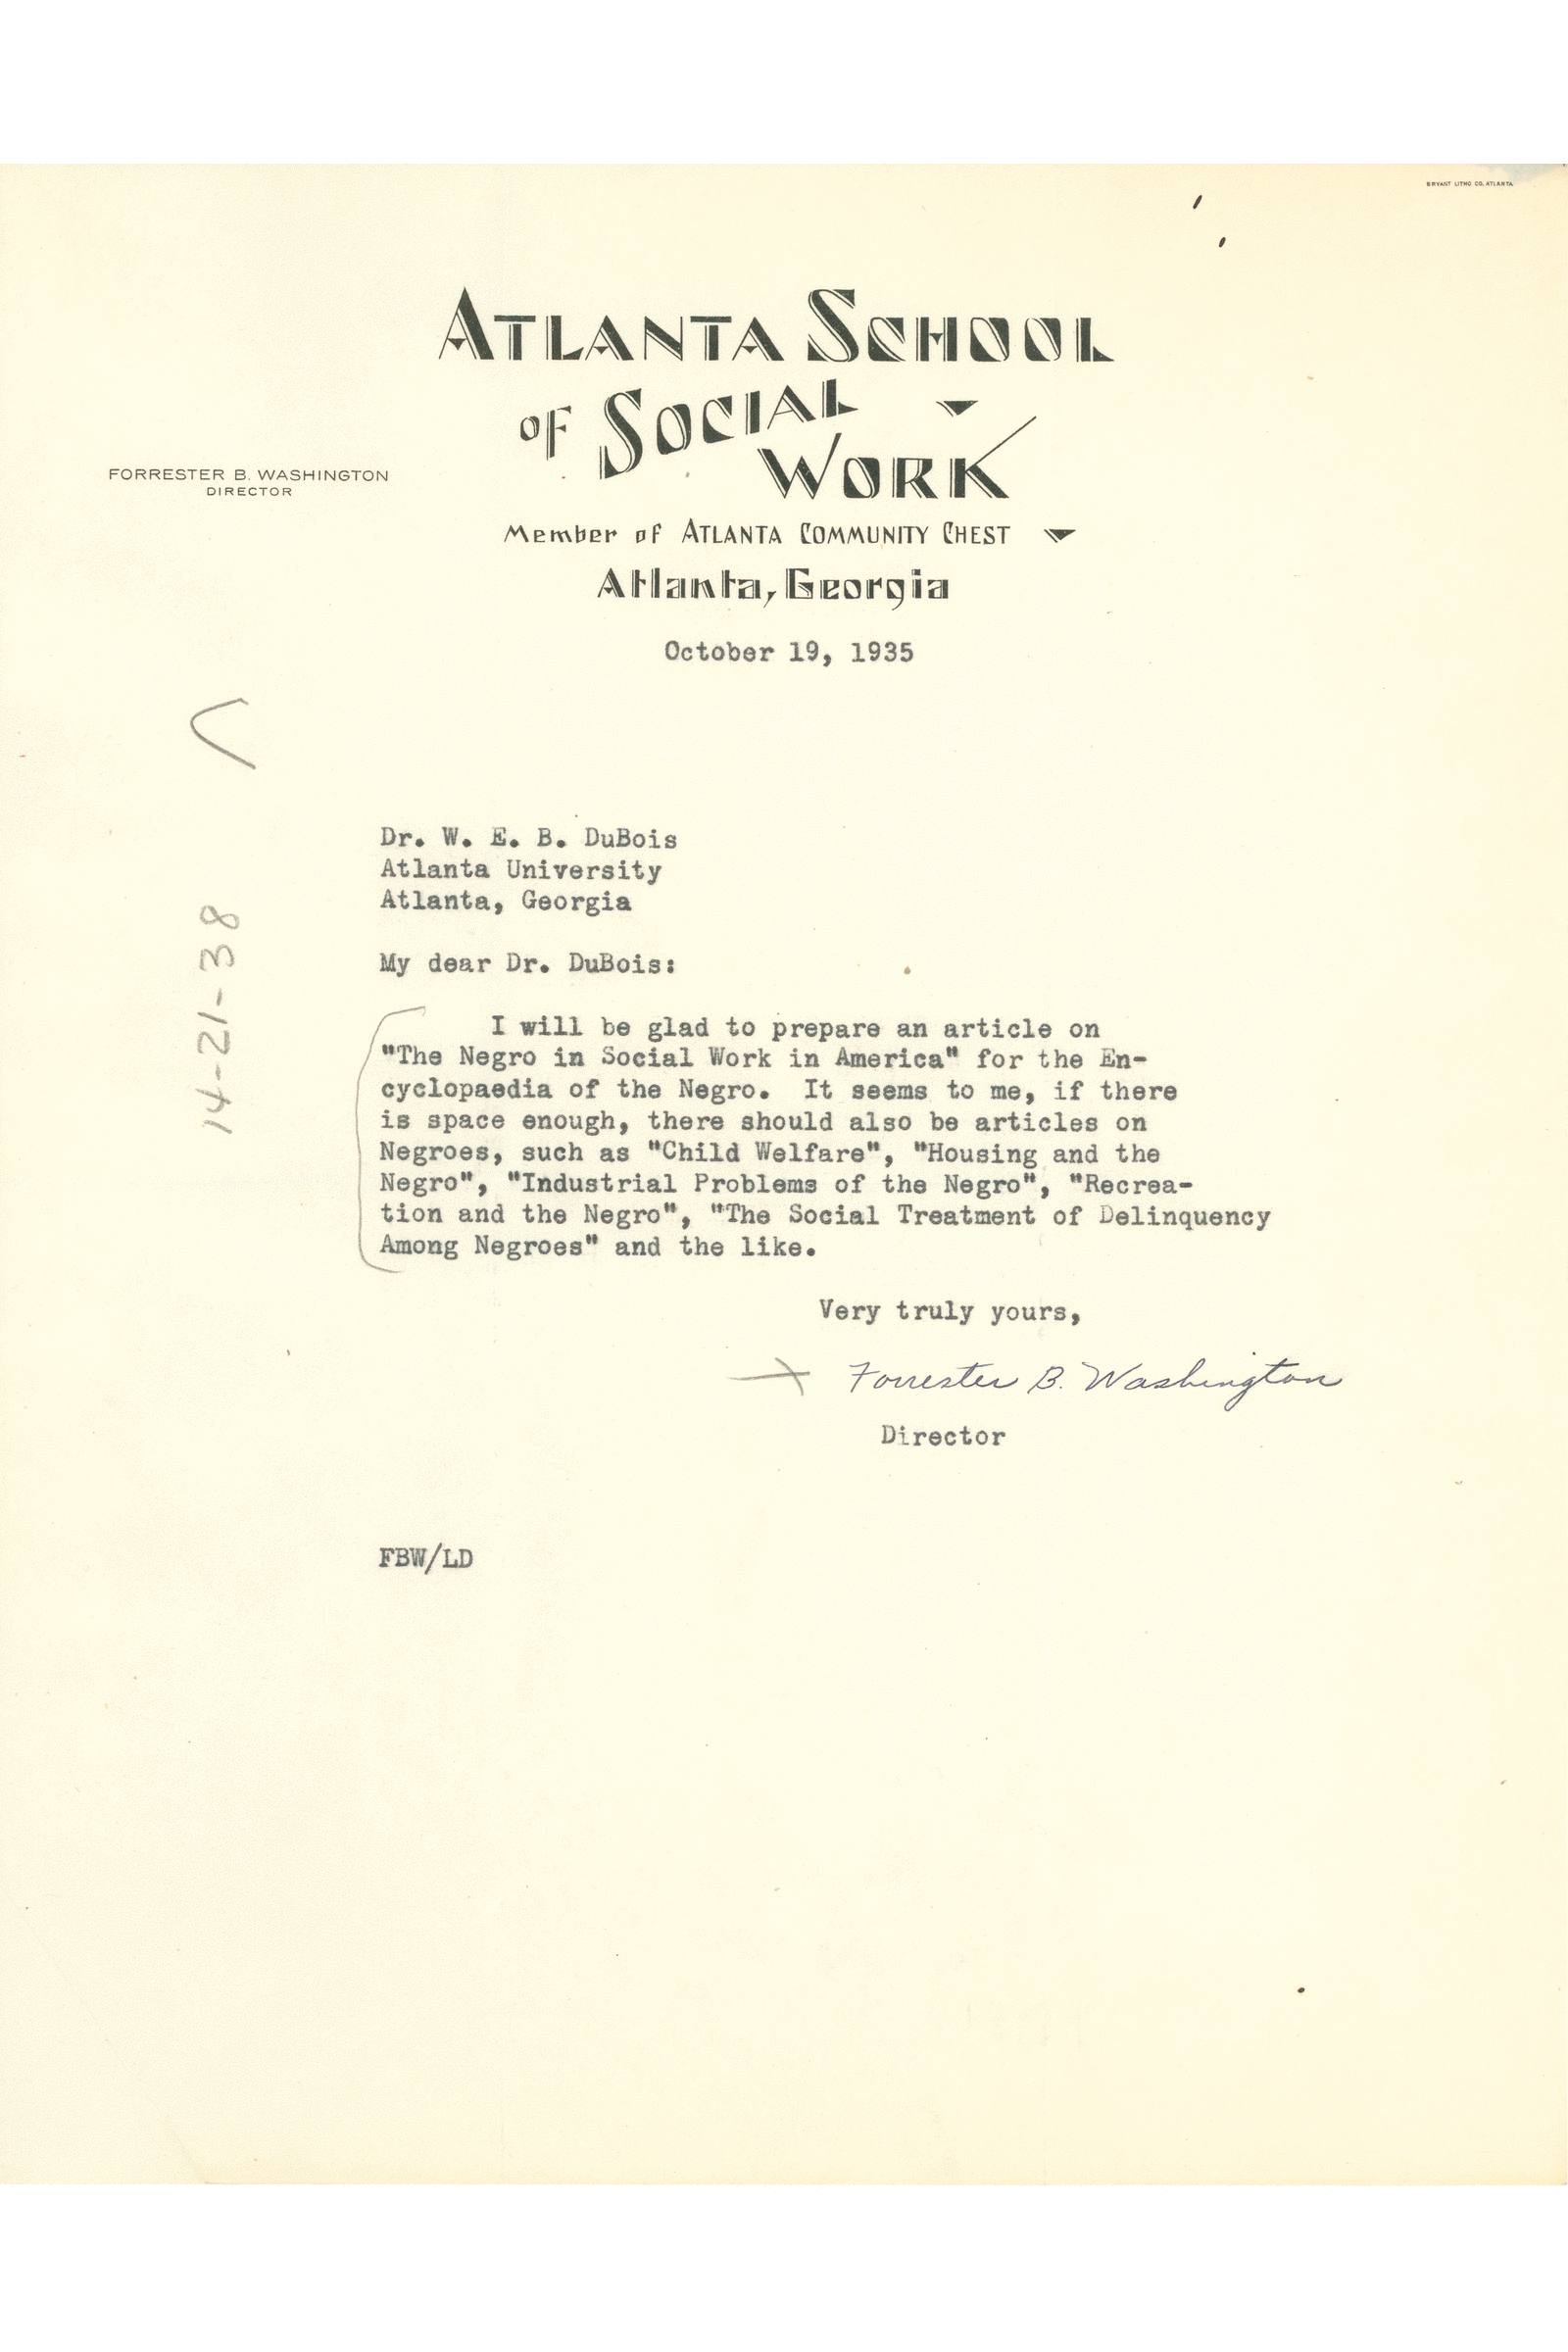 Image for letter from forrester b washington to w e b du bois, october 19, 1935 w e b du bois papers (ms 312) special collections and university archives, umass amherst